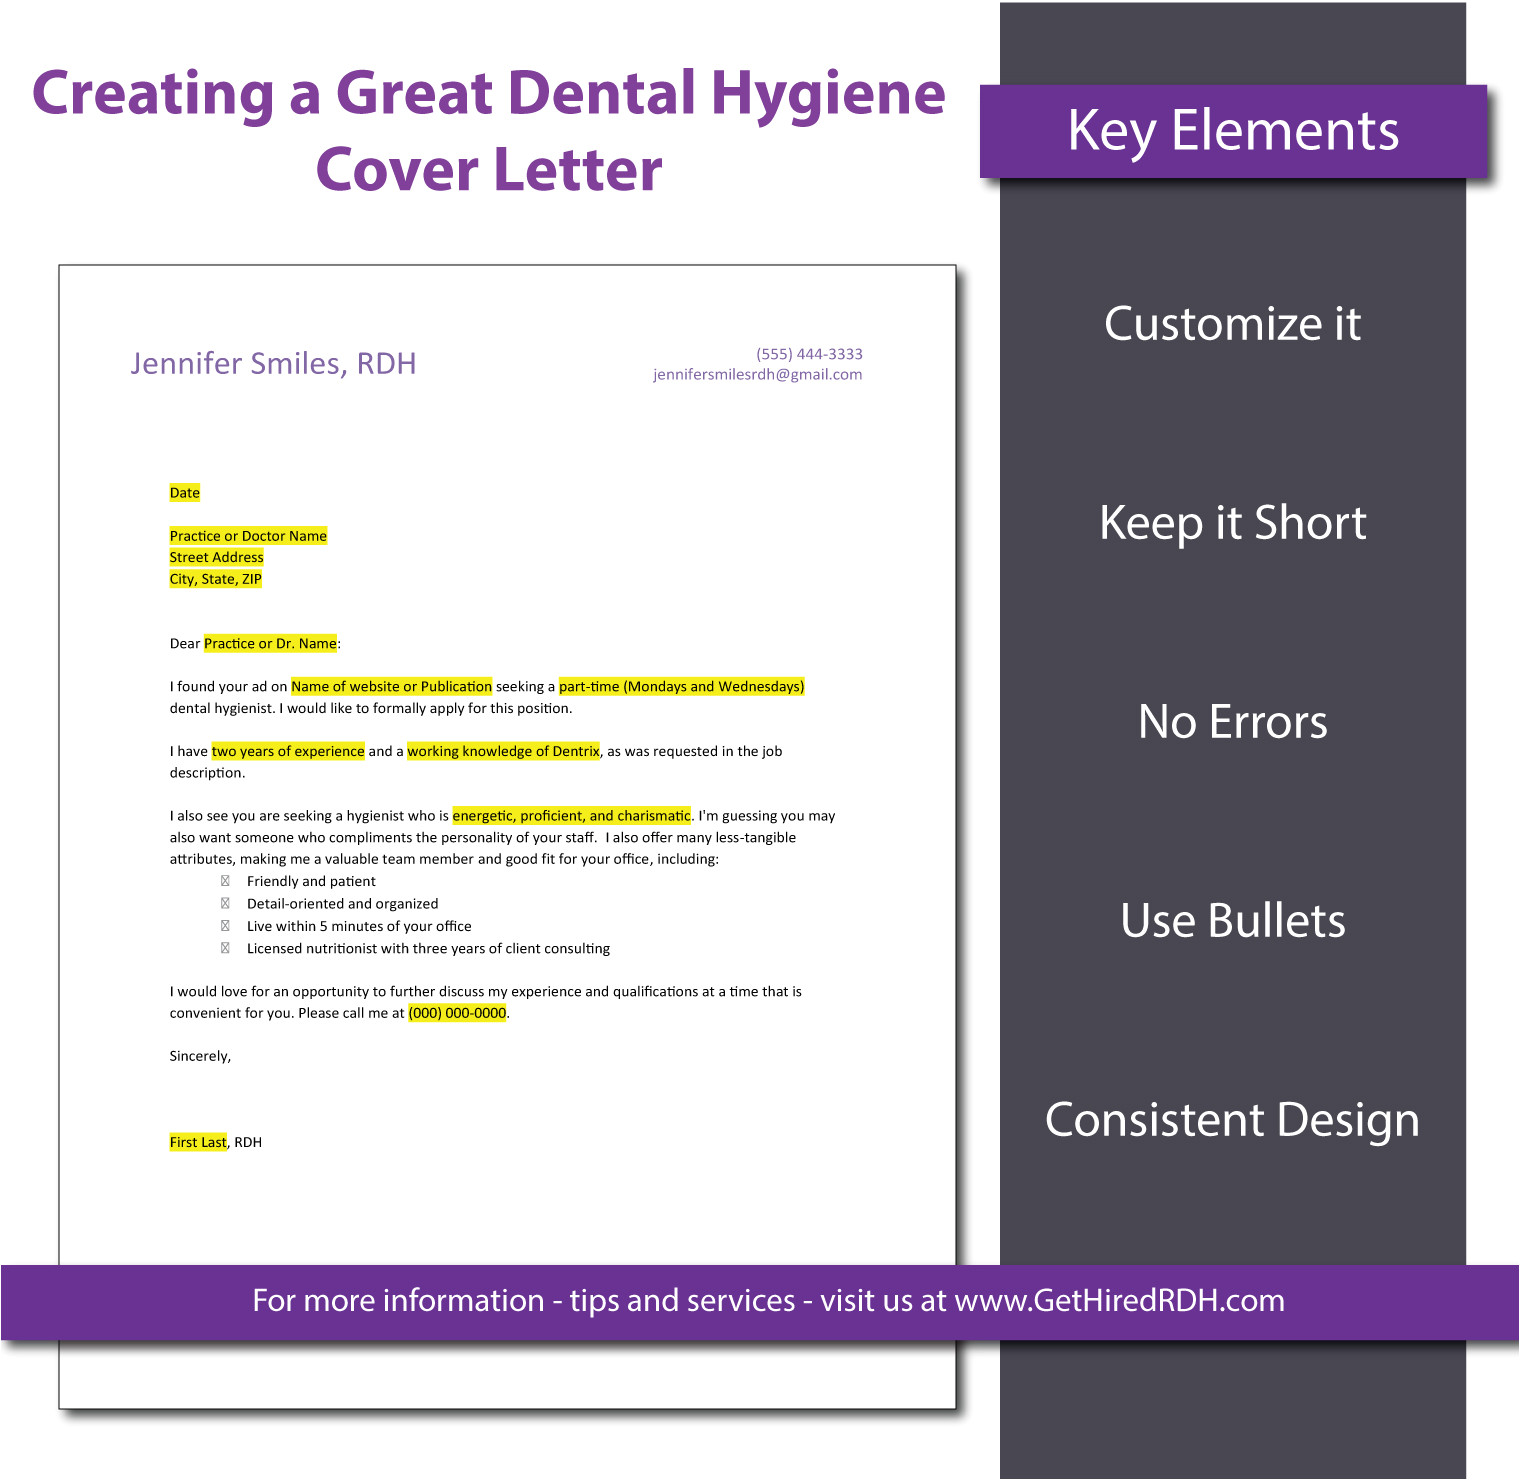 5 tips for creating a dental hygiene cover letter that gets you noticed